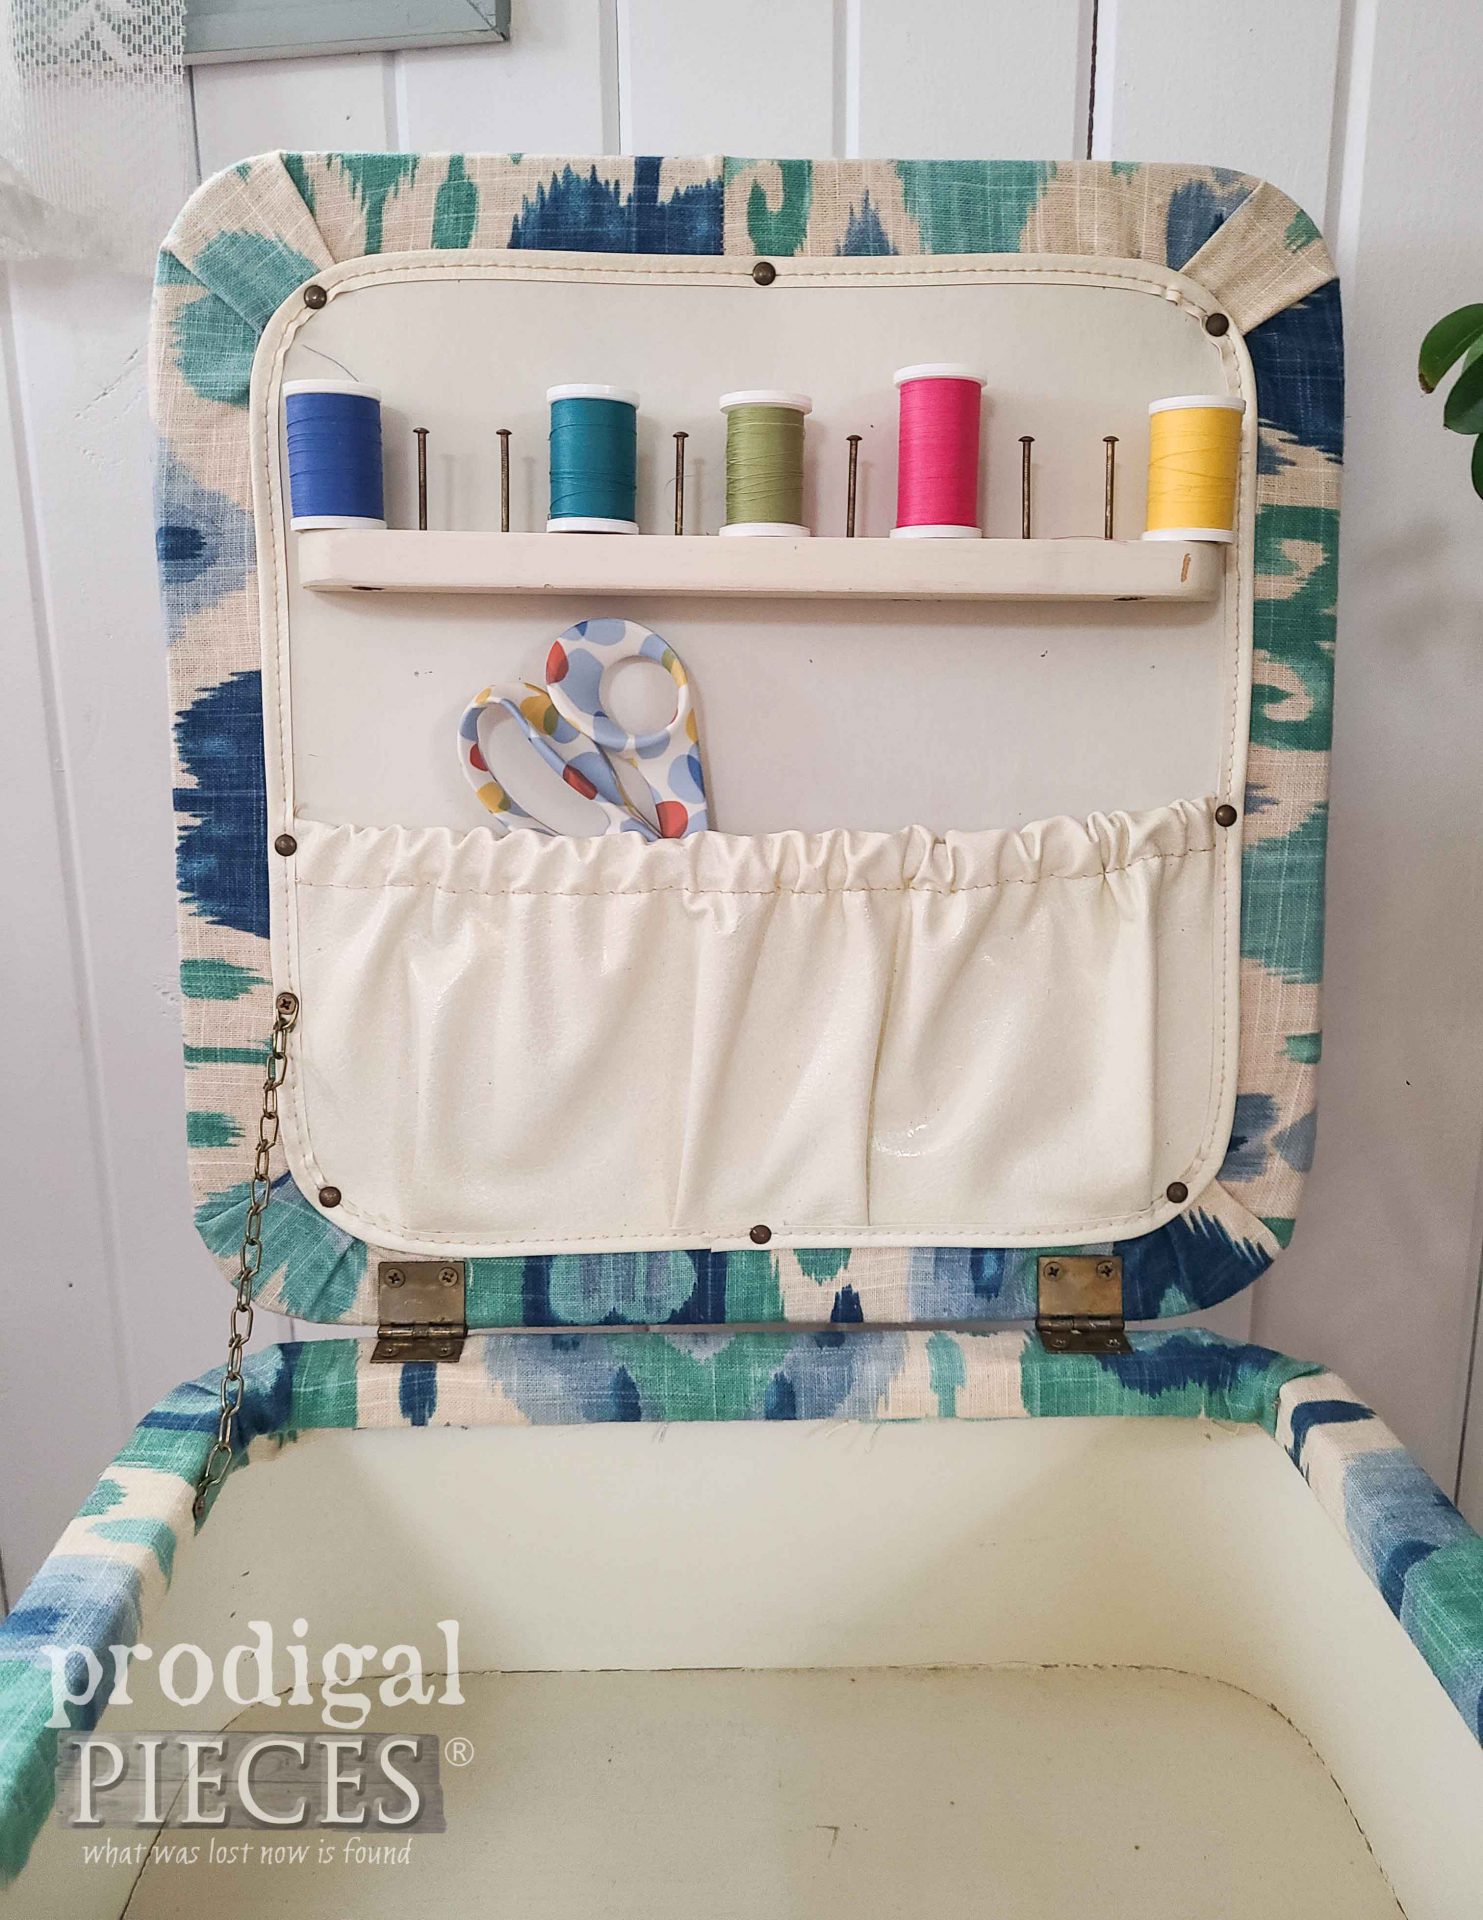 Vintage Sewing Stool Notions Holder by Larissa of Prodigal Pieces | prodigalpieces.com #prodigalpieces #diy #sewing #furntiure